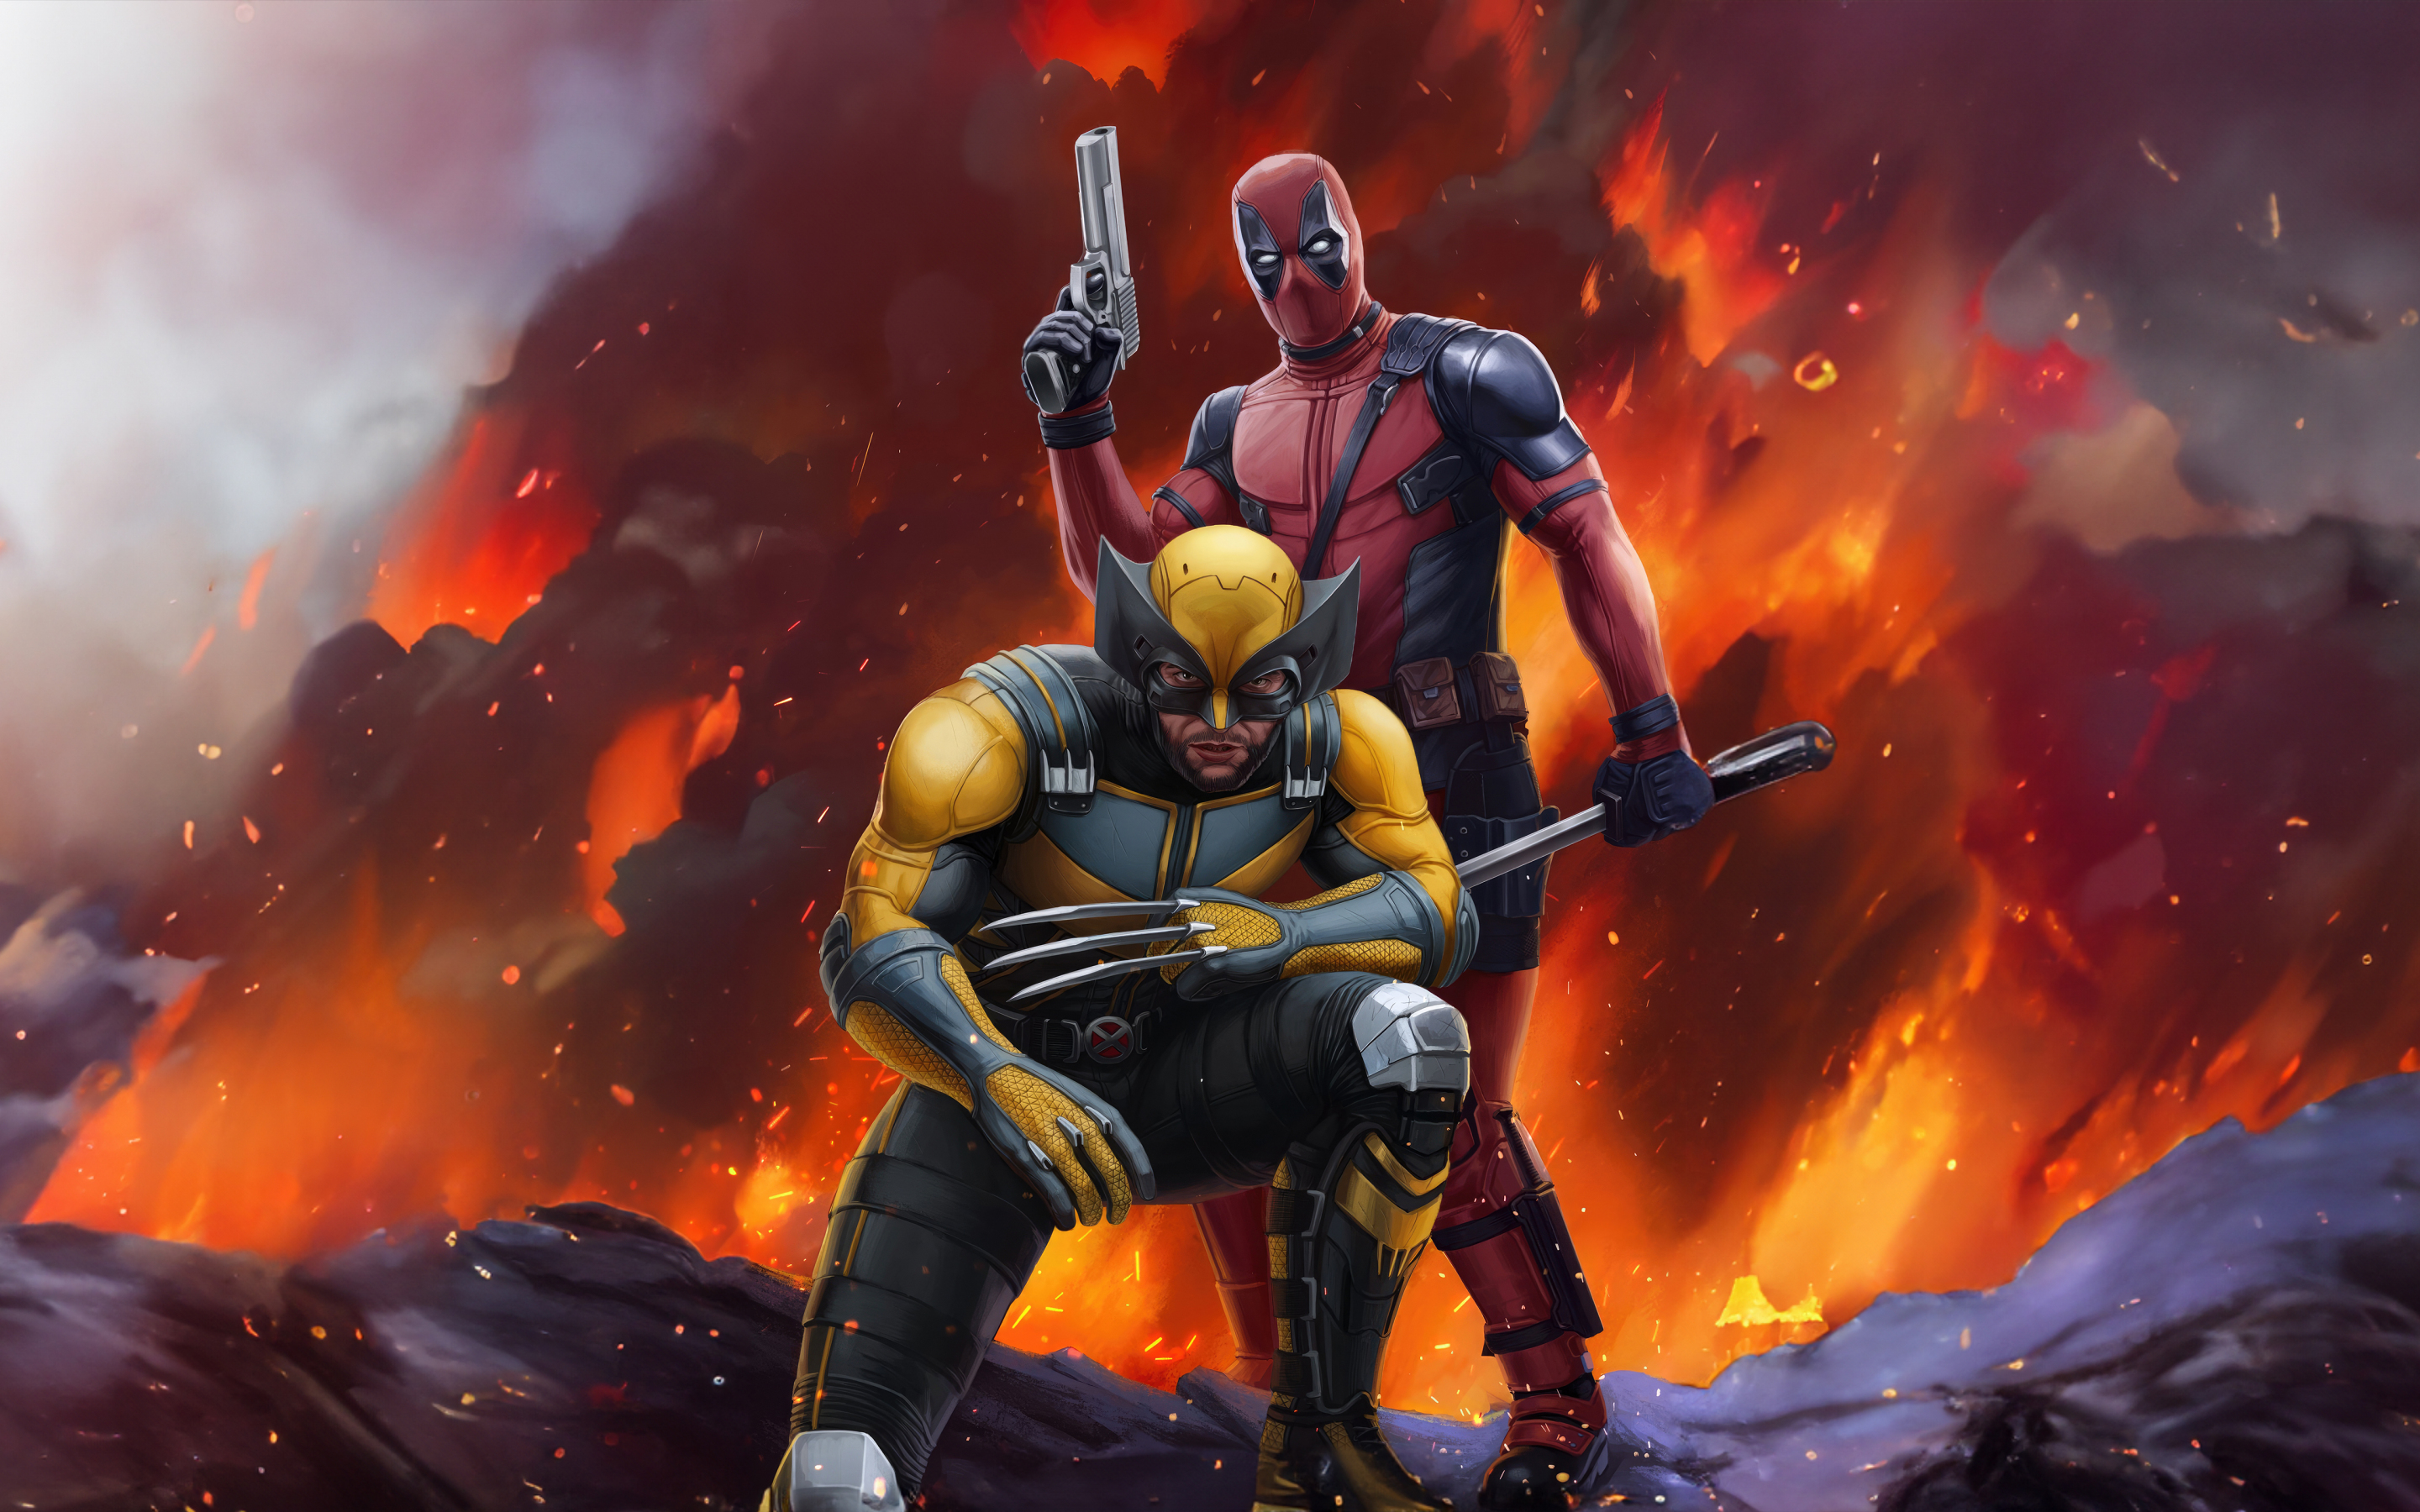 Wolverine and deadpool, unstoppable team, 2880x1800 wallpaper